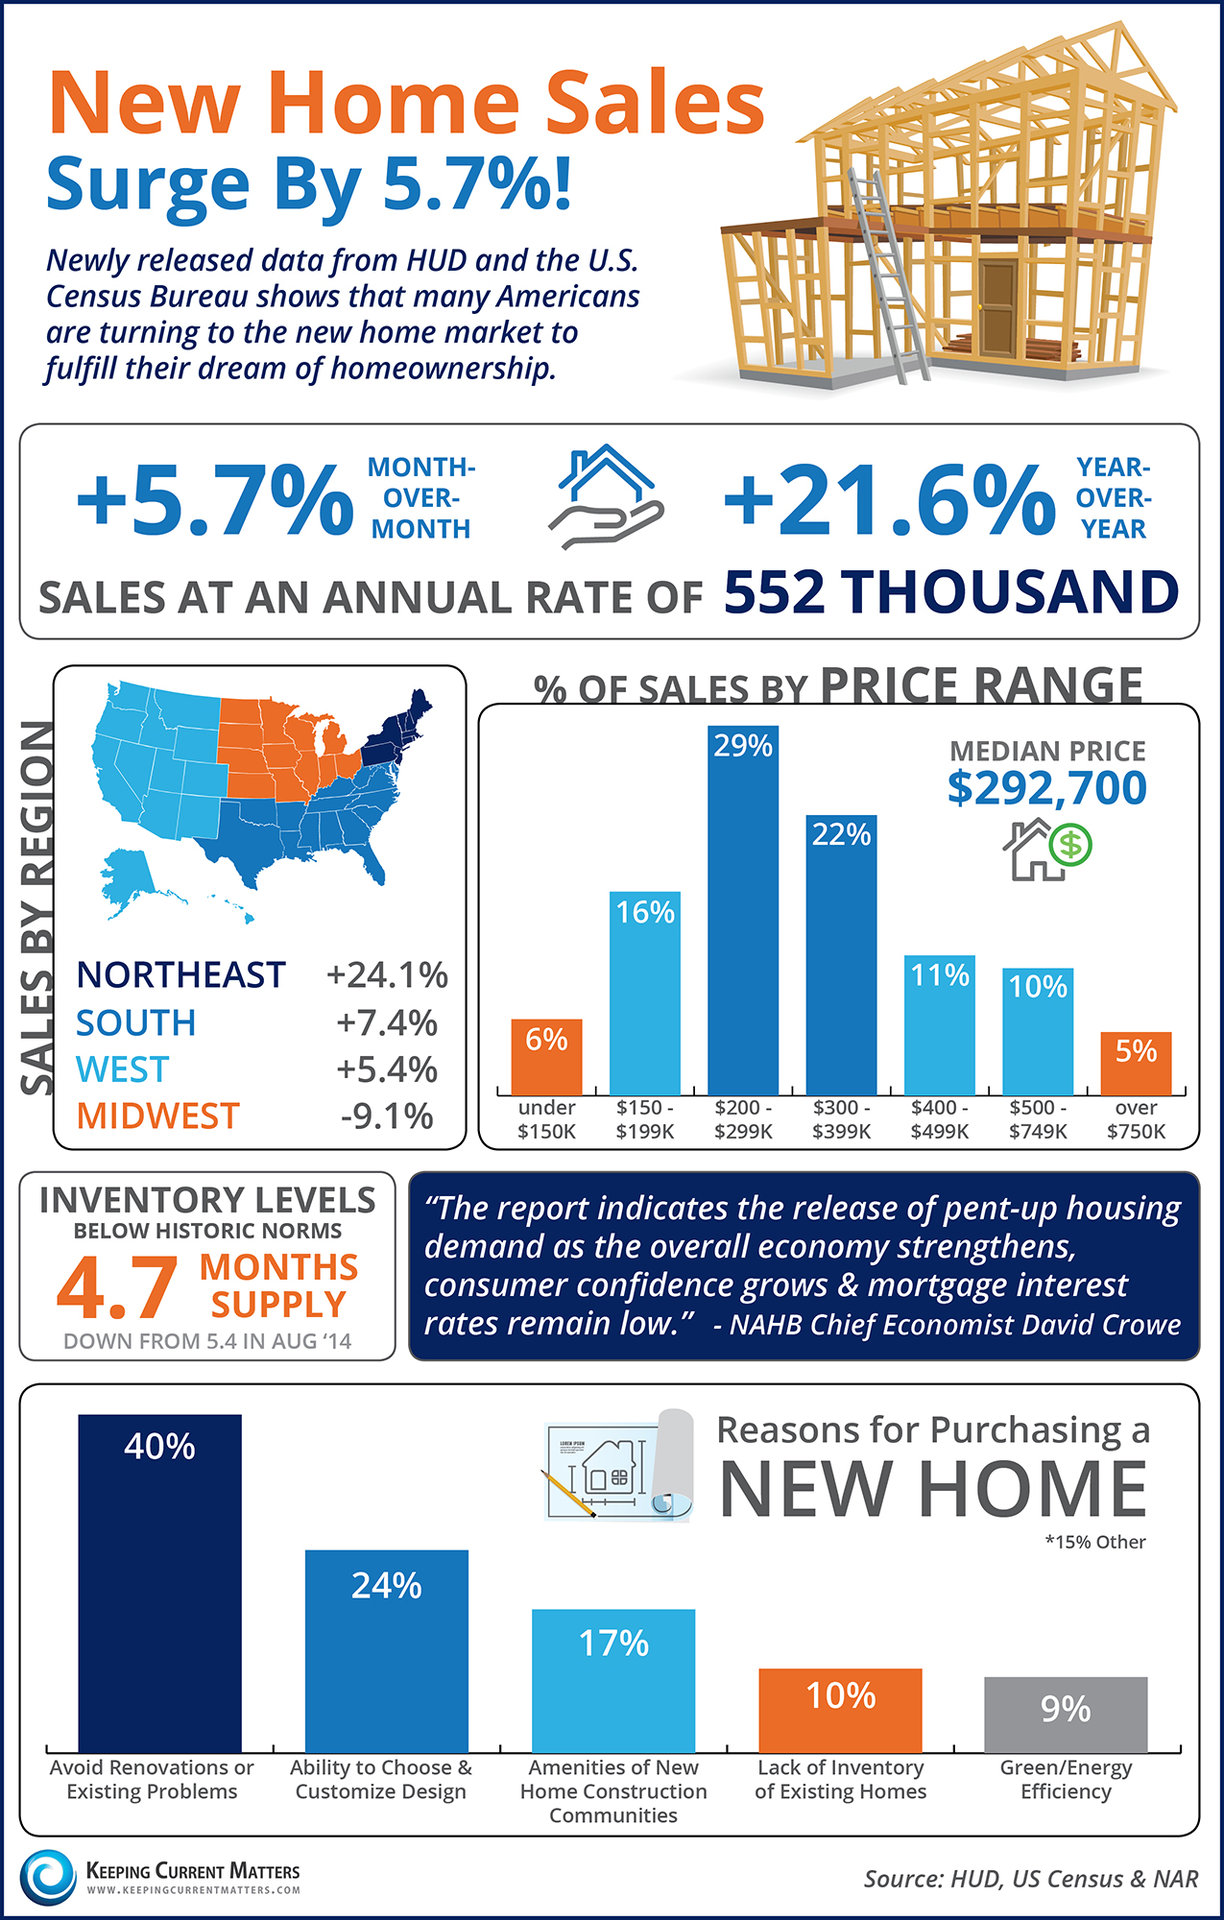 New Home Sales Surge By 5.7%! [INFOGRAPHIC] | Keeping Current Matters